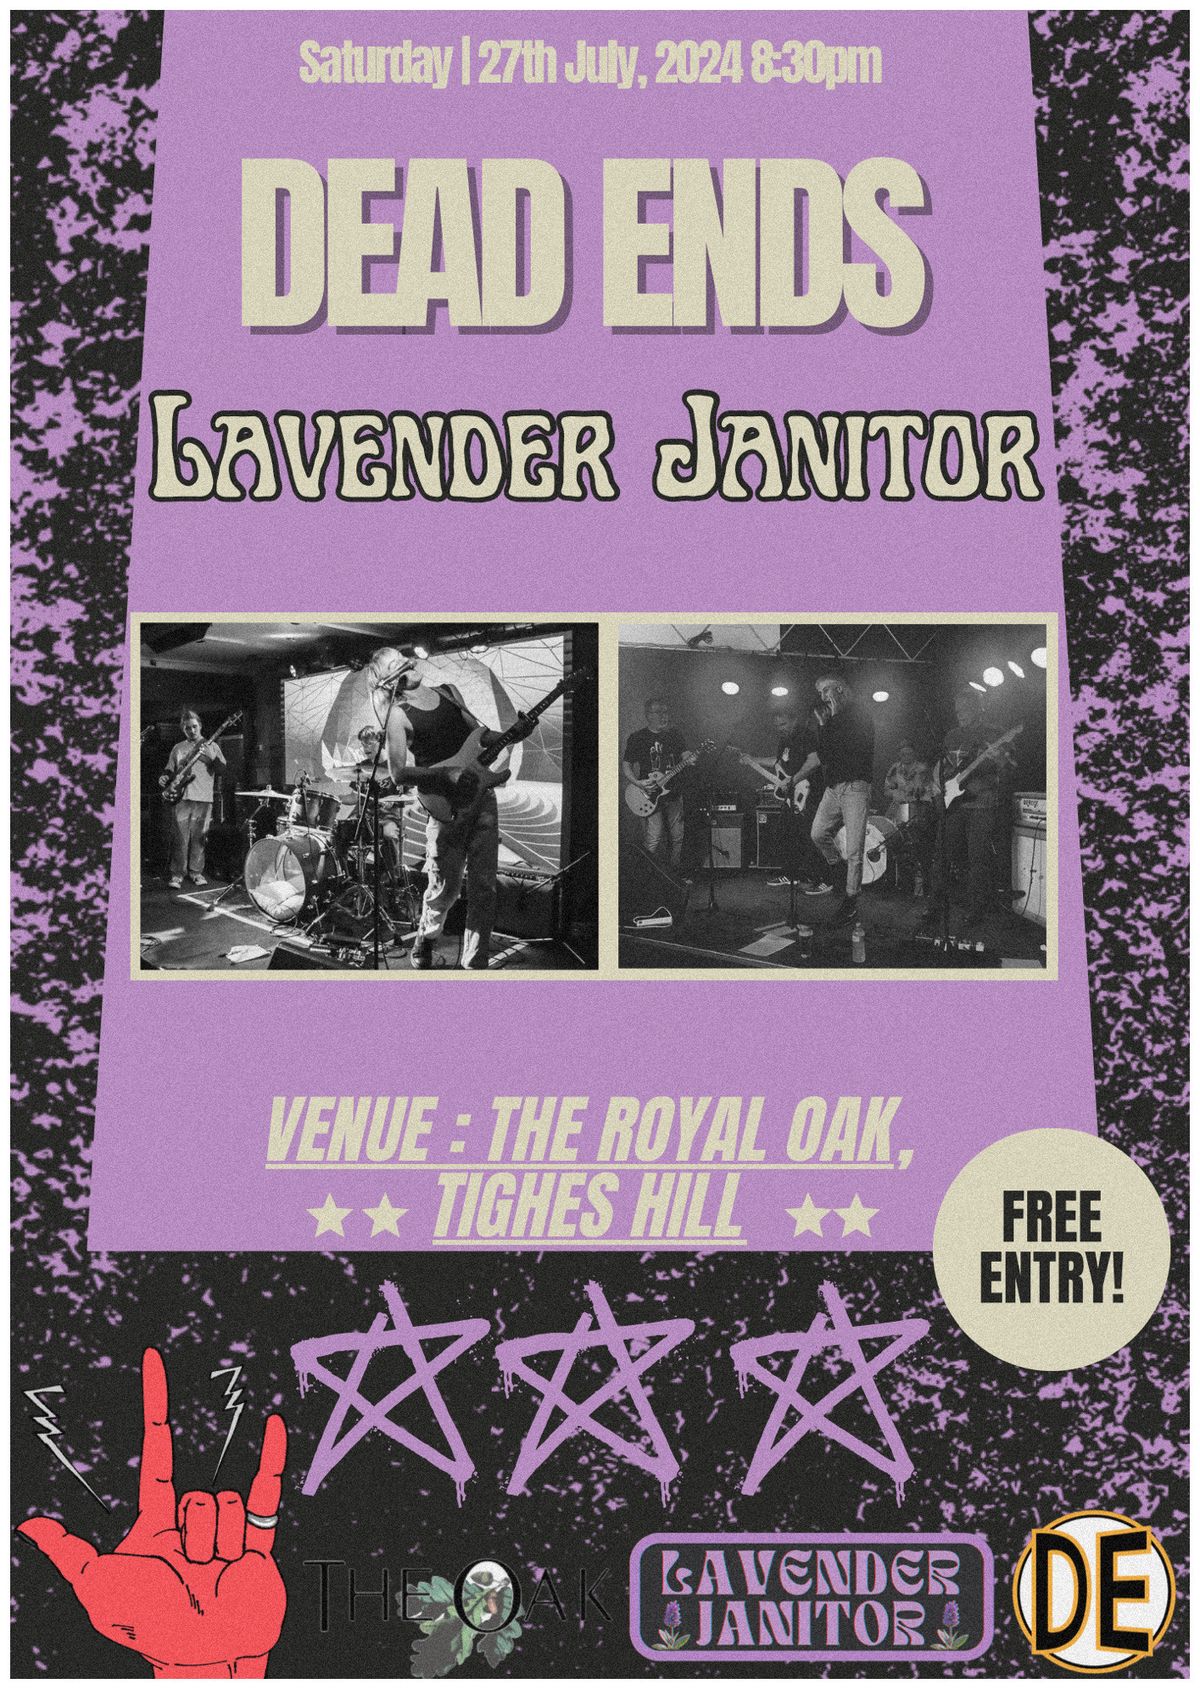 Old V's New - Rock with the Dead Ends and Roll with Lavender Janitor. 